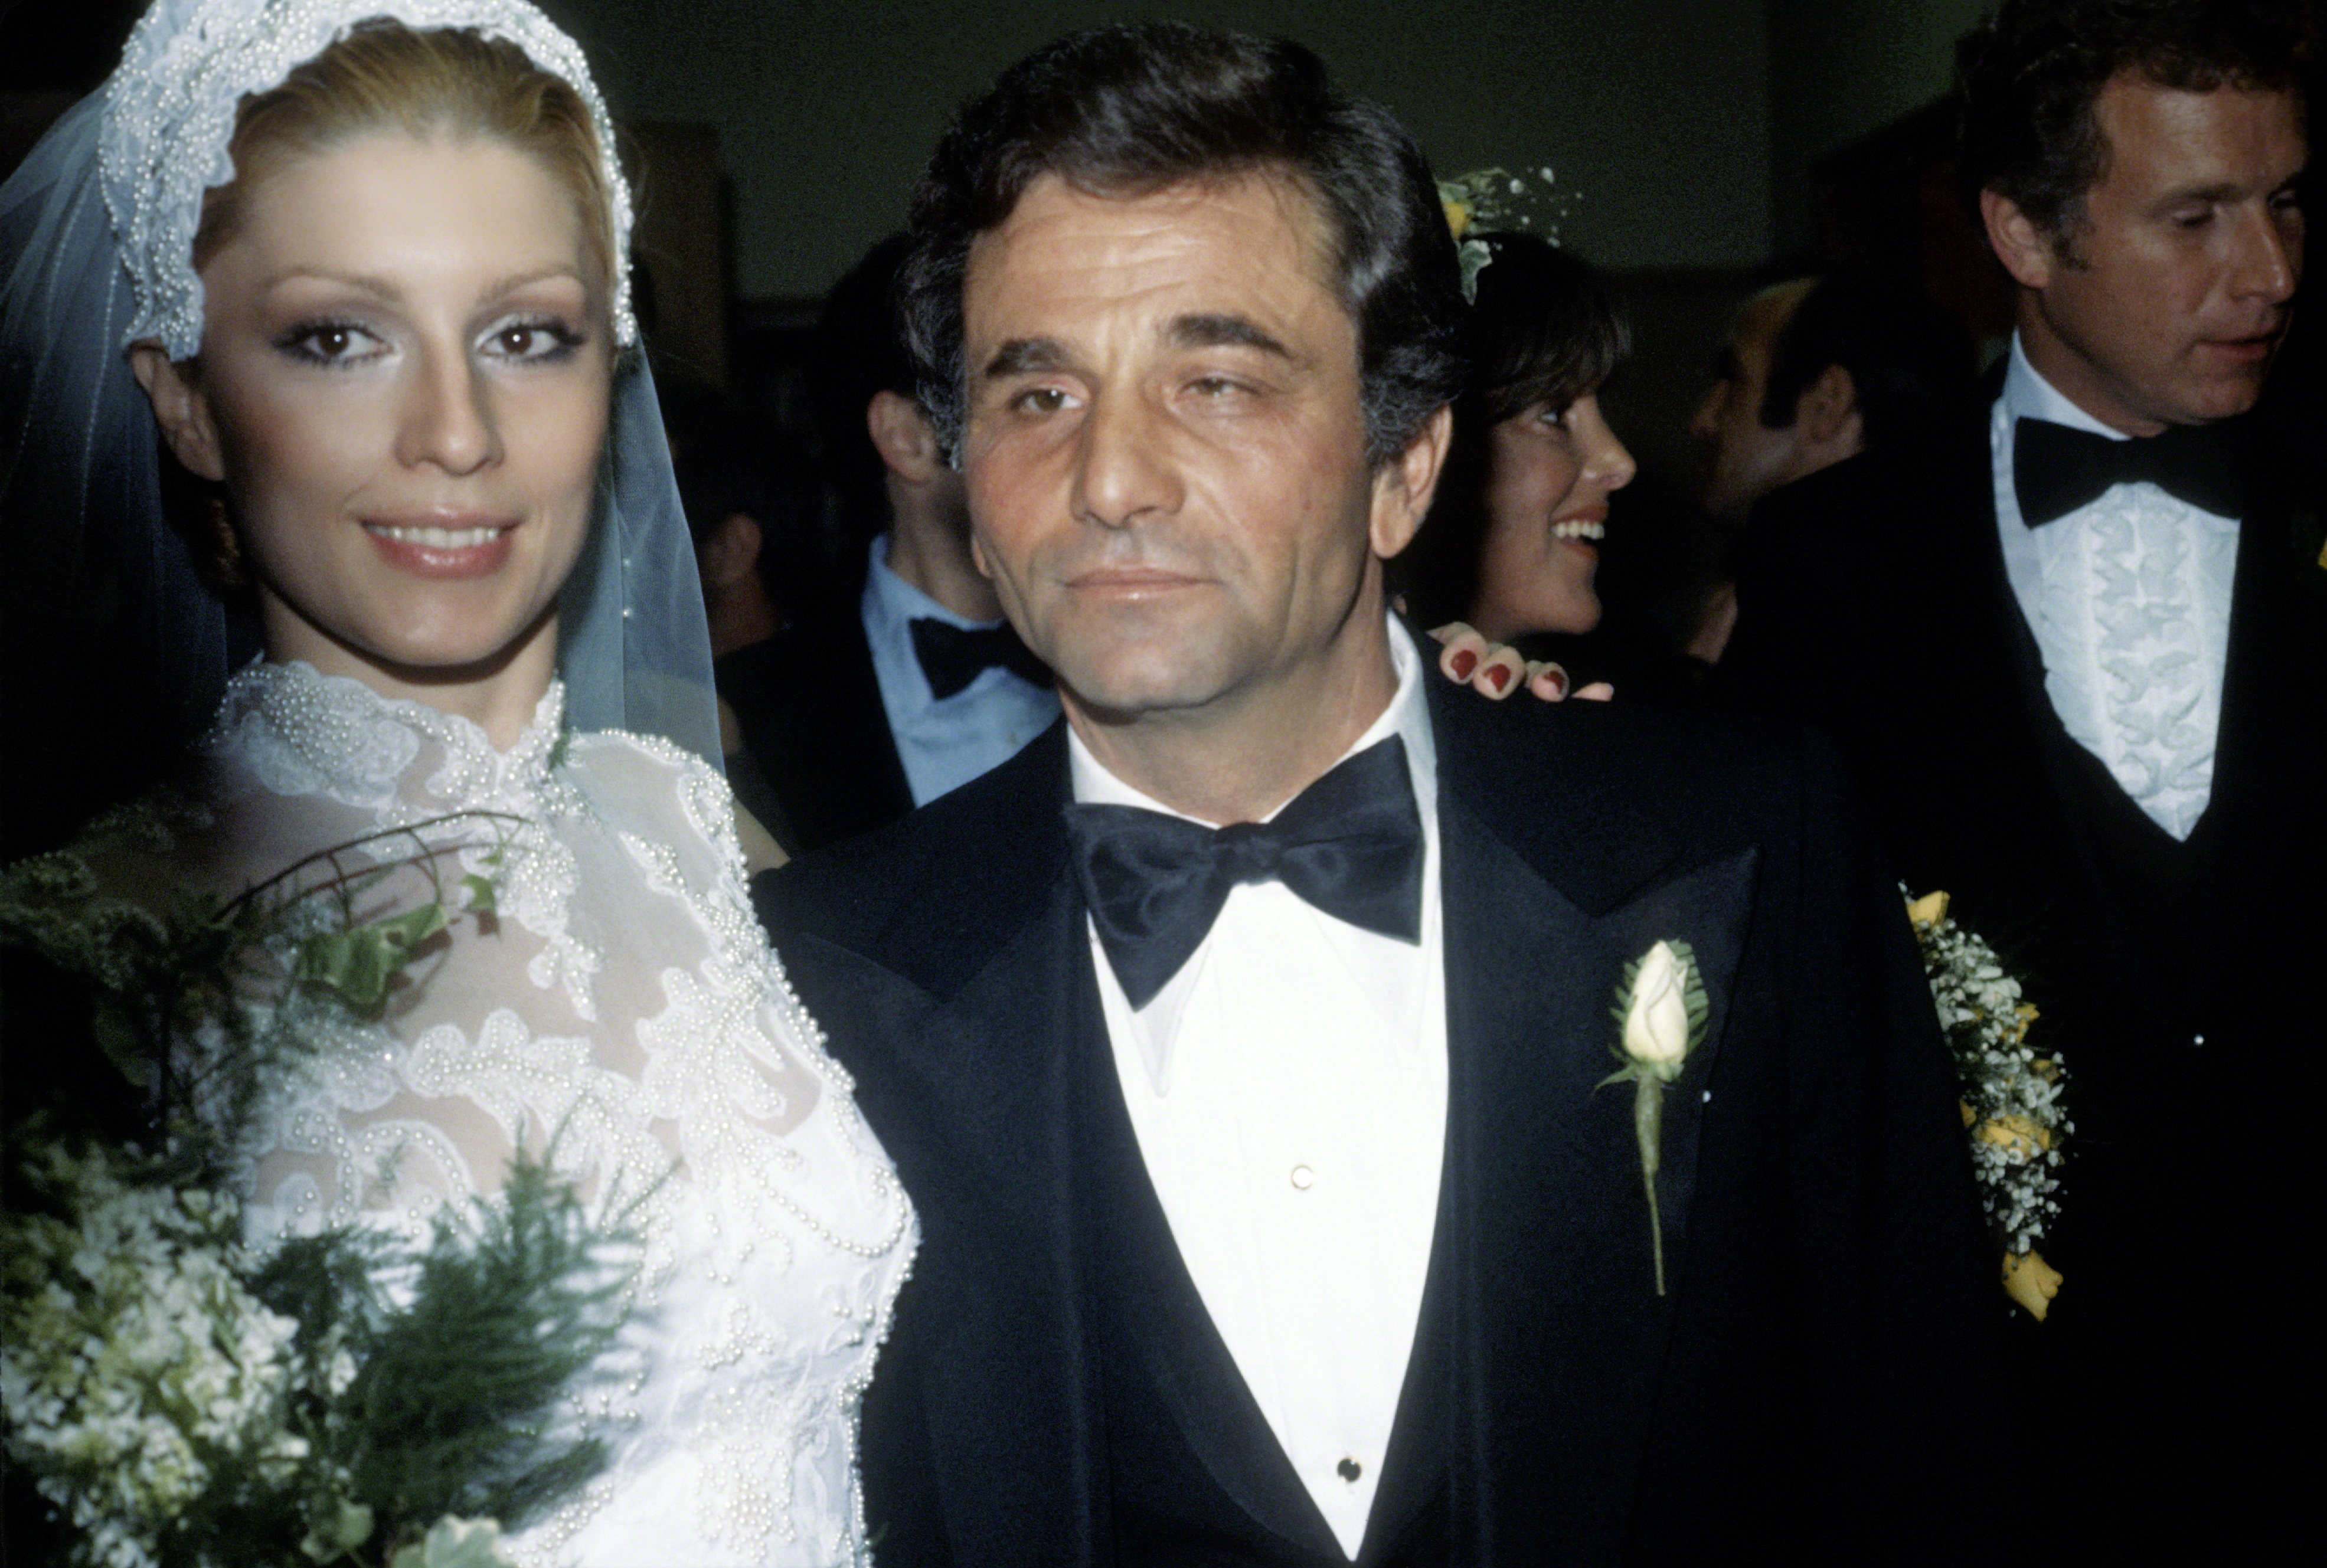 Peter Falk and Shera Danese during their wedding, circa 1977 in Los Angeles, California. | Source: Getty Images